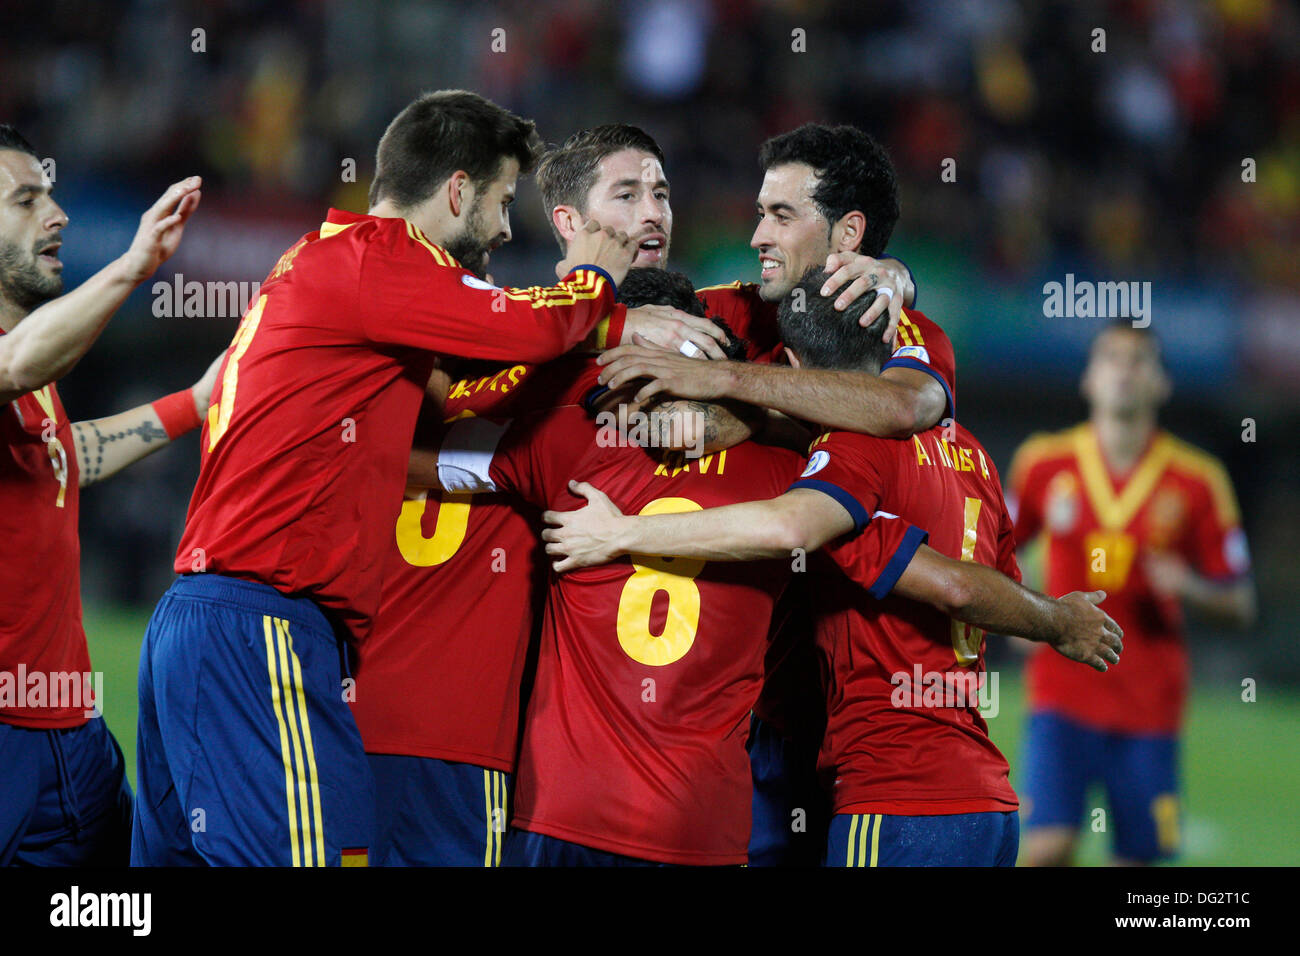 Palma de Mallorca, Spain, 12th Oct 2013, Spain«s soccer national team players celebrate after scoring a goal during their 2014 World Cup qualifying soccer match against Belarus at Son Moix stadium in Palma de Mallorca on friday 11th October. Zixia/Alamy Live News. Stock Photo